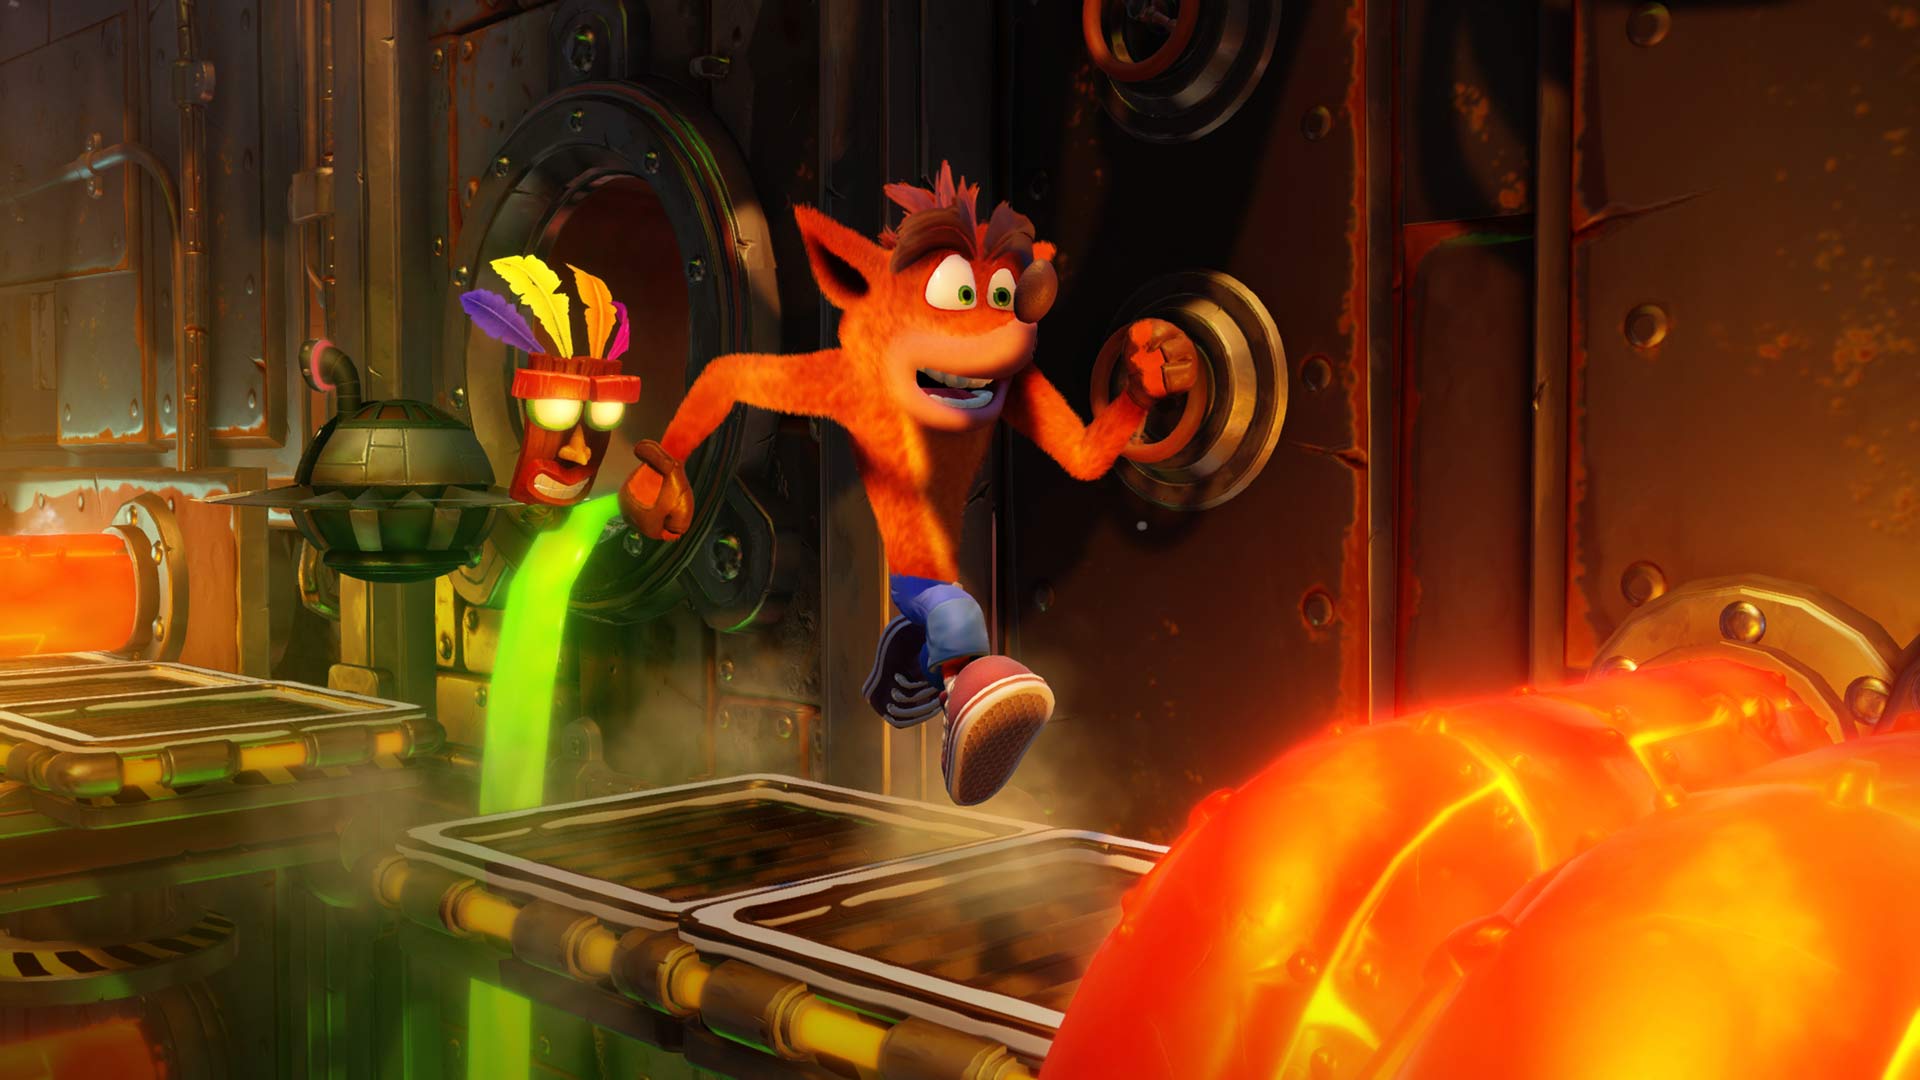 But What About Crash's Duds?